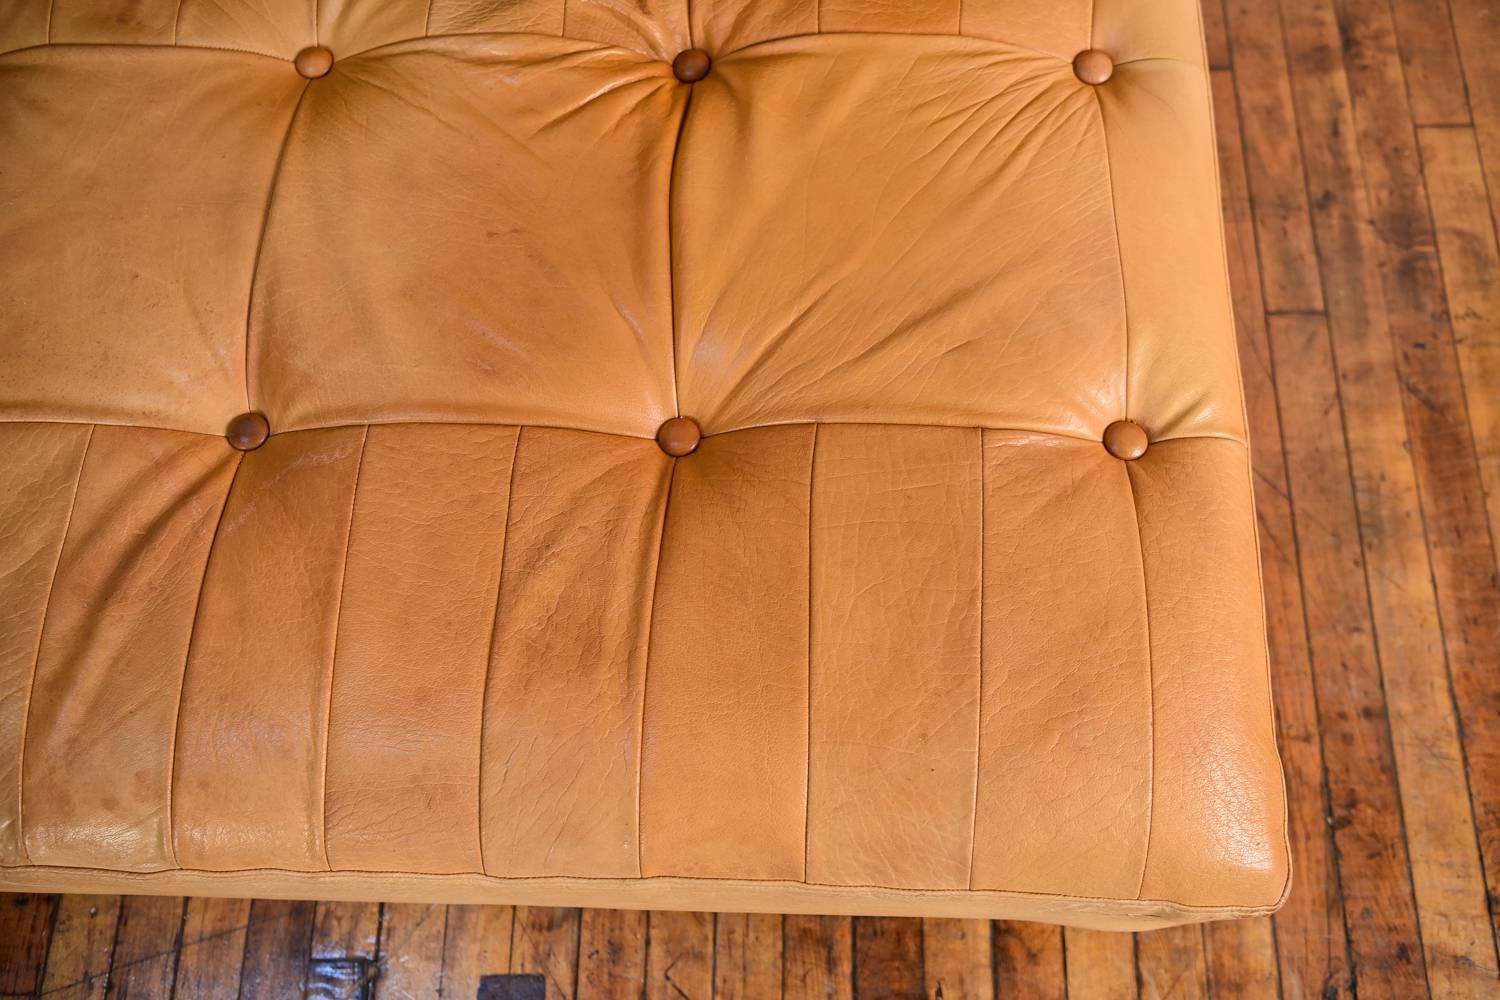 Danish Midcentury De Sede Style Butterscotch Colored Leather Sofa or Daybed 1